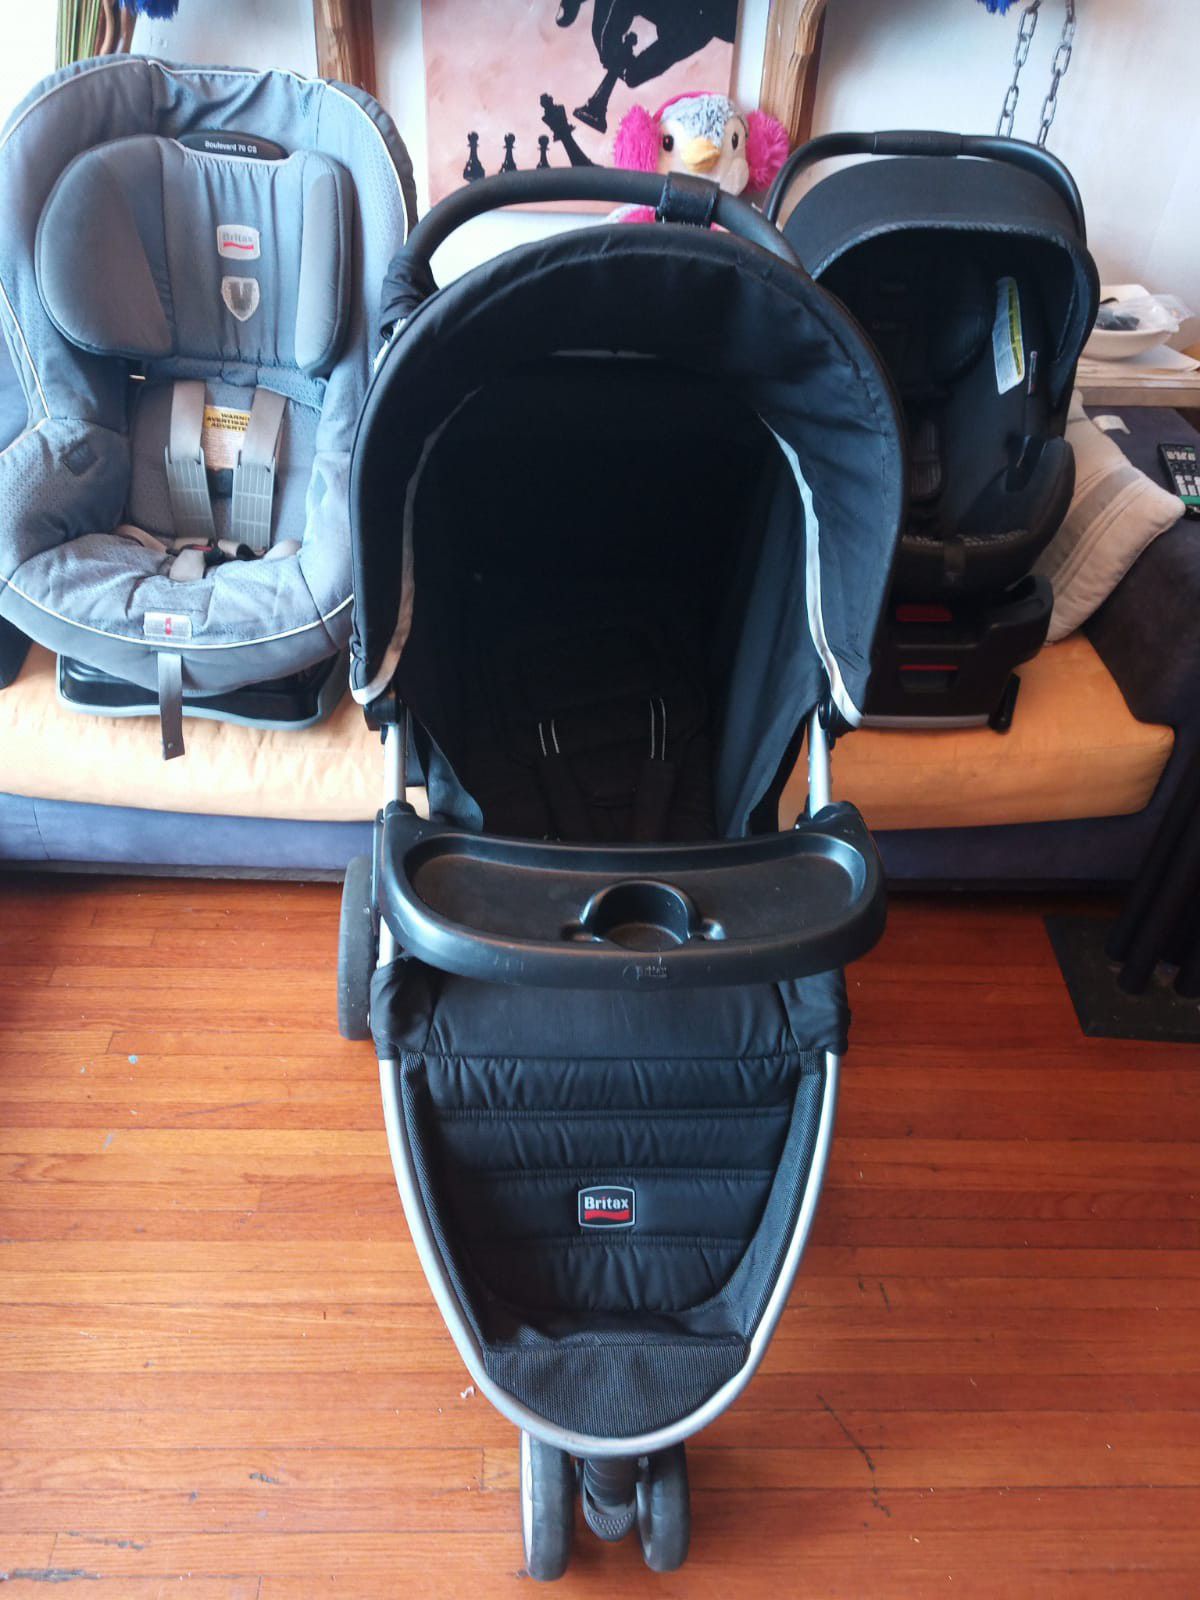 Britax complete set. Stroller, car seat for baby, and car seat for kids. In excellent conditions.